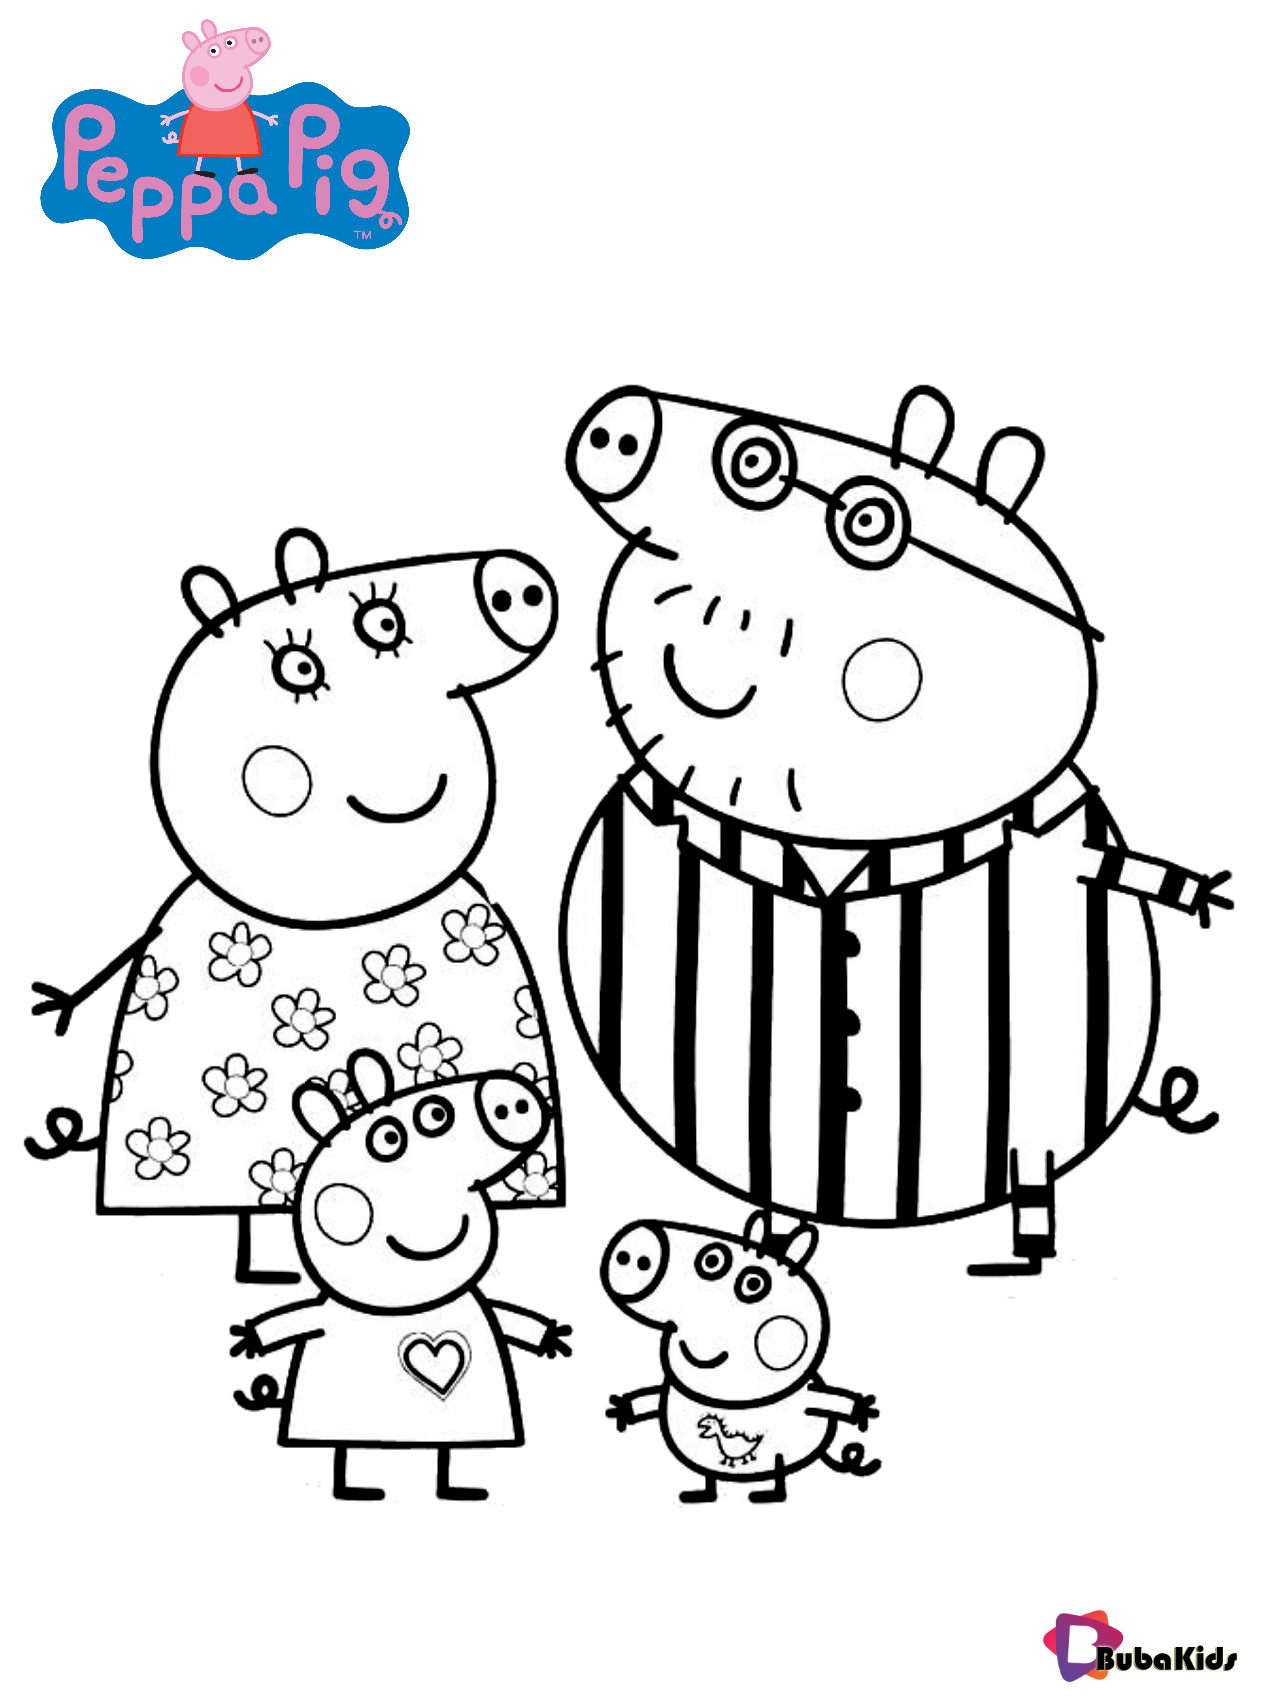 Peppa pig family coloring page